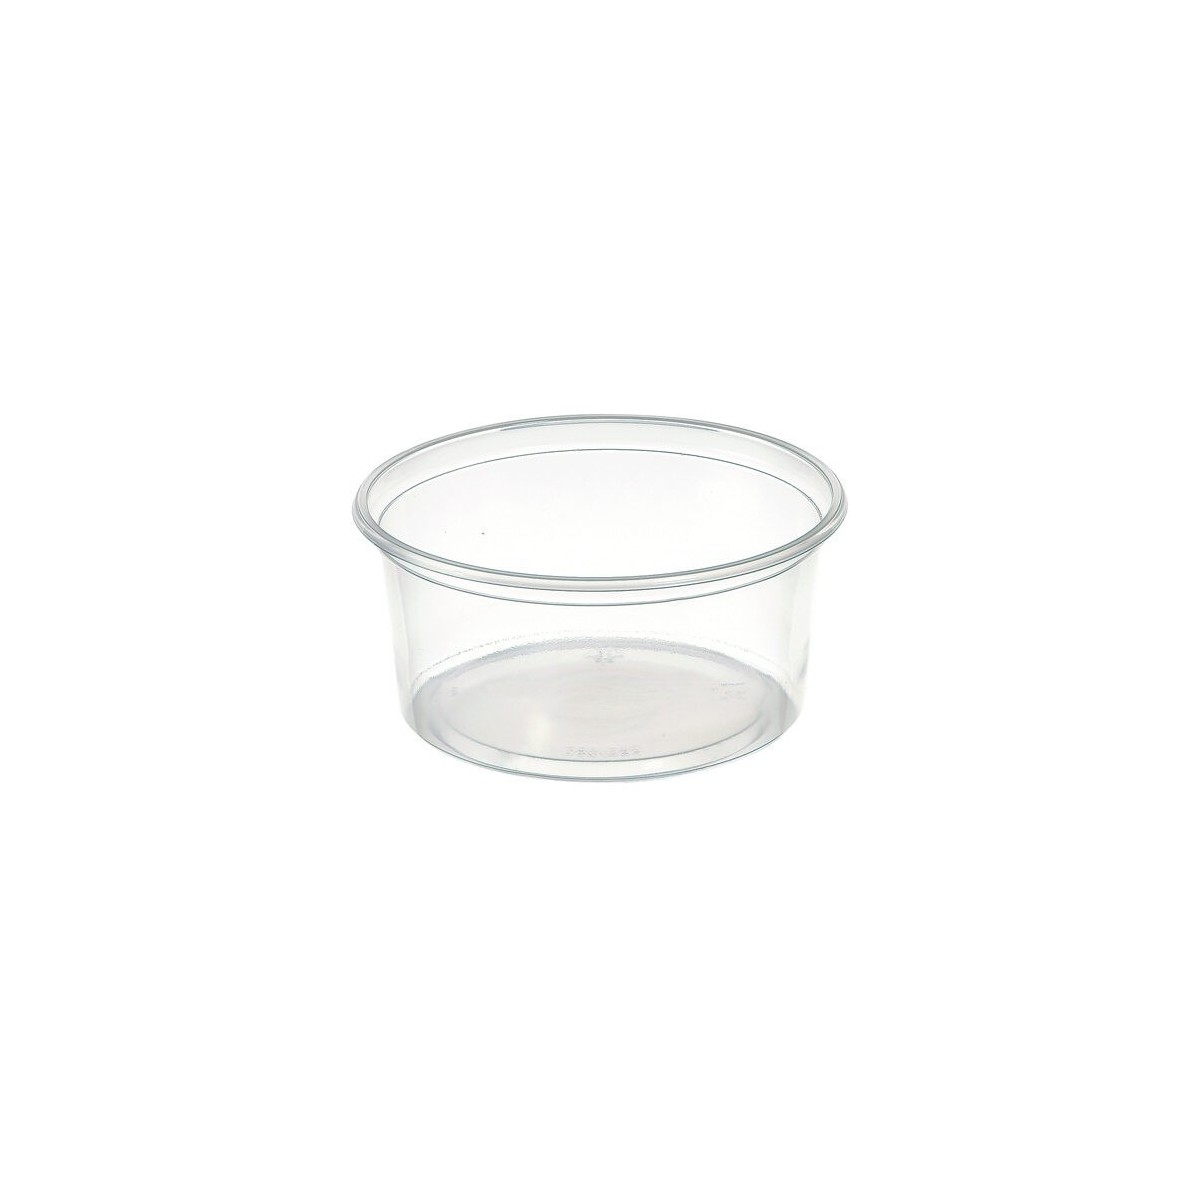 DUNI  TRAY PP DELIPACK TRANSP ROUND 250ML 50PCPACKAGE